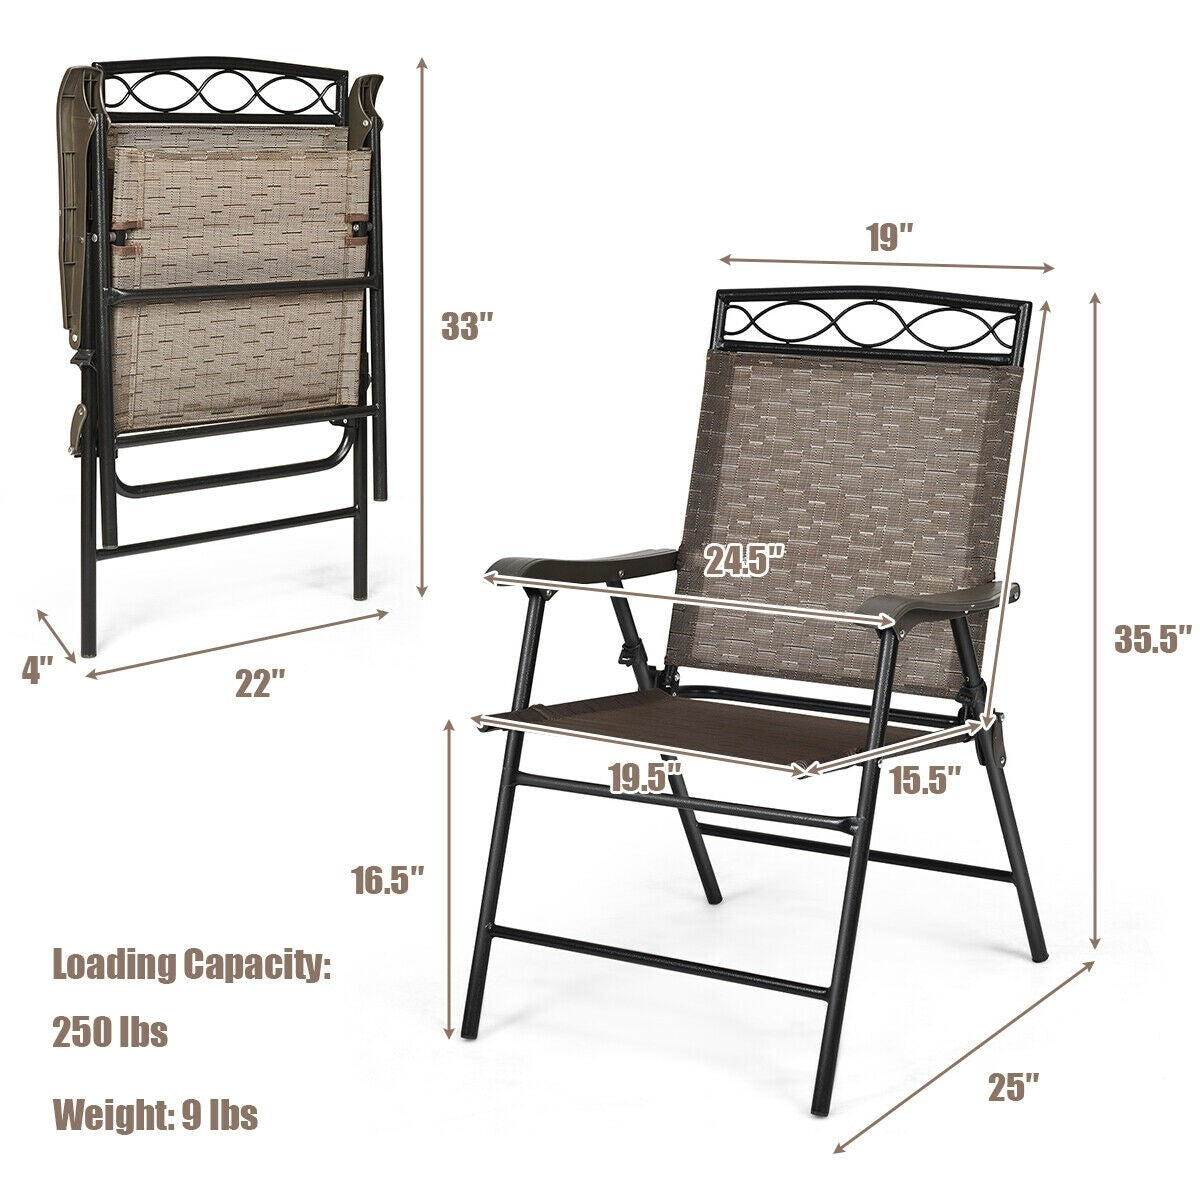 Set of 2 Patio Chairs, Outdoor Folding Lawn Chairs for Beach